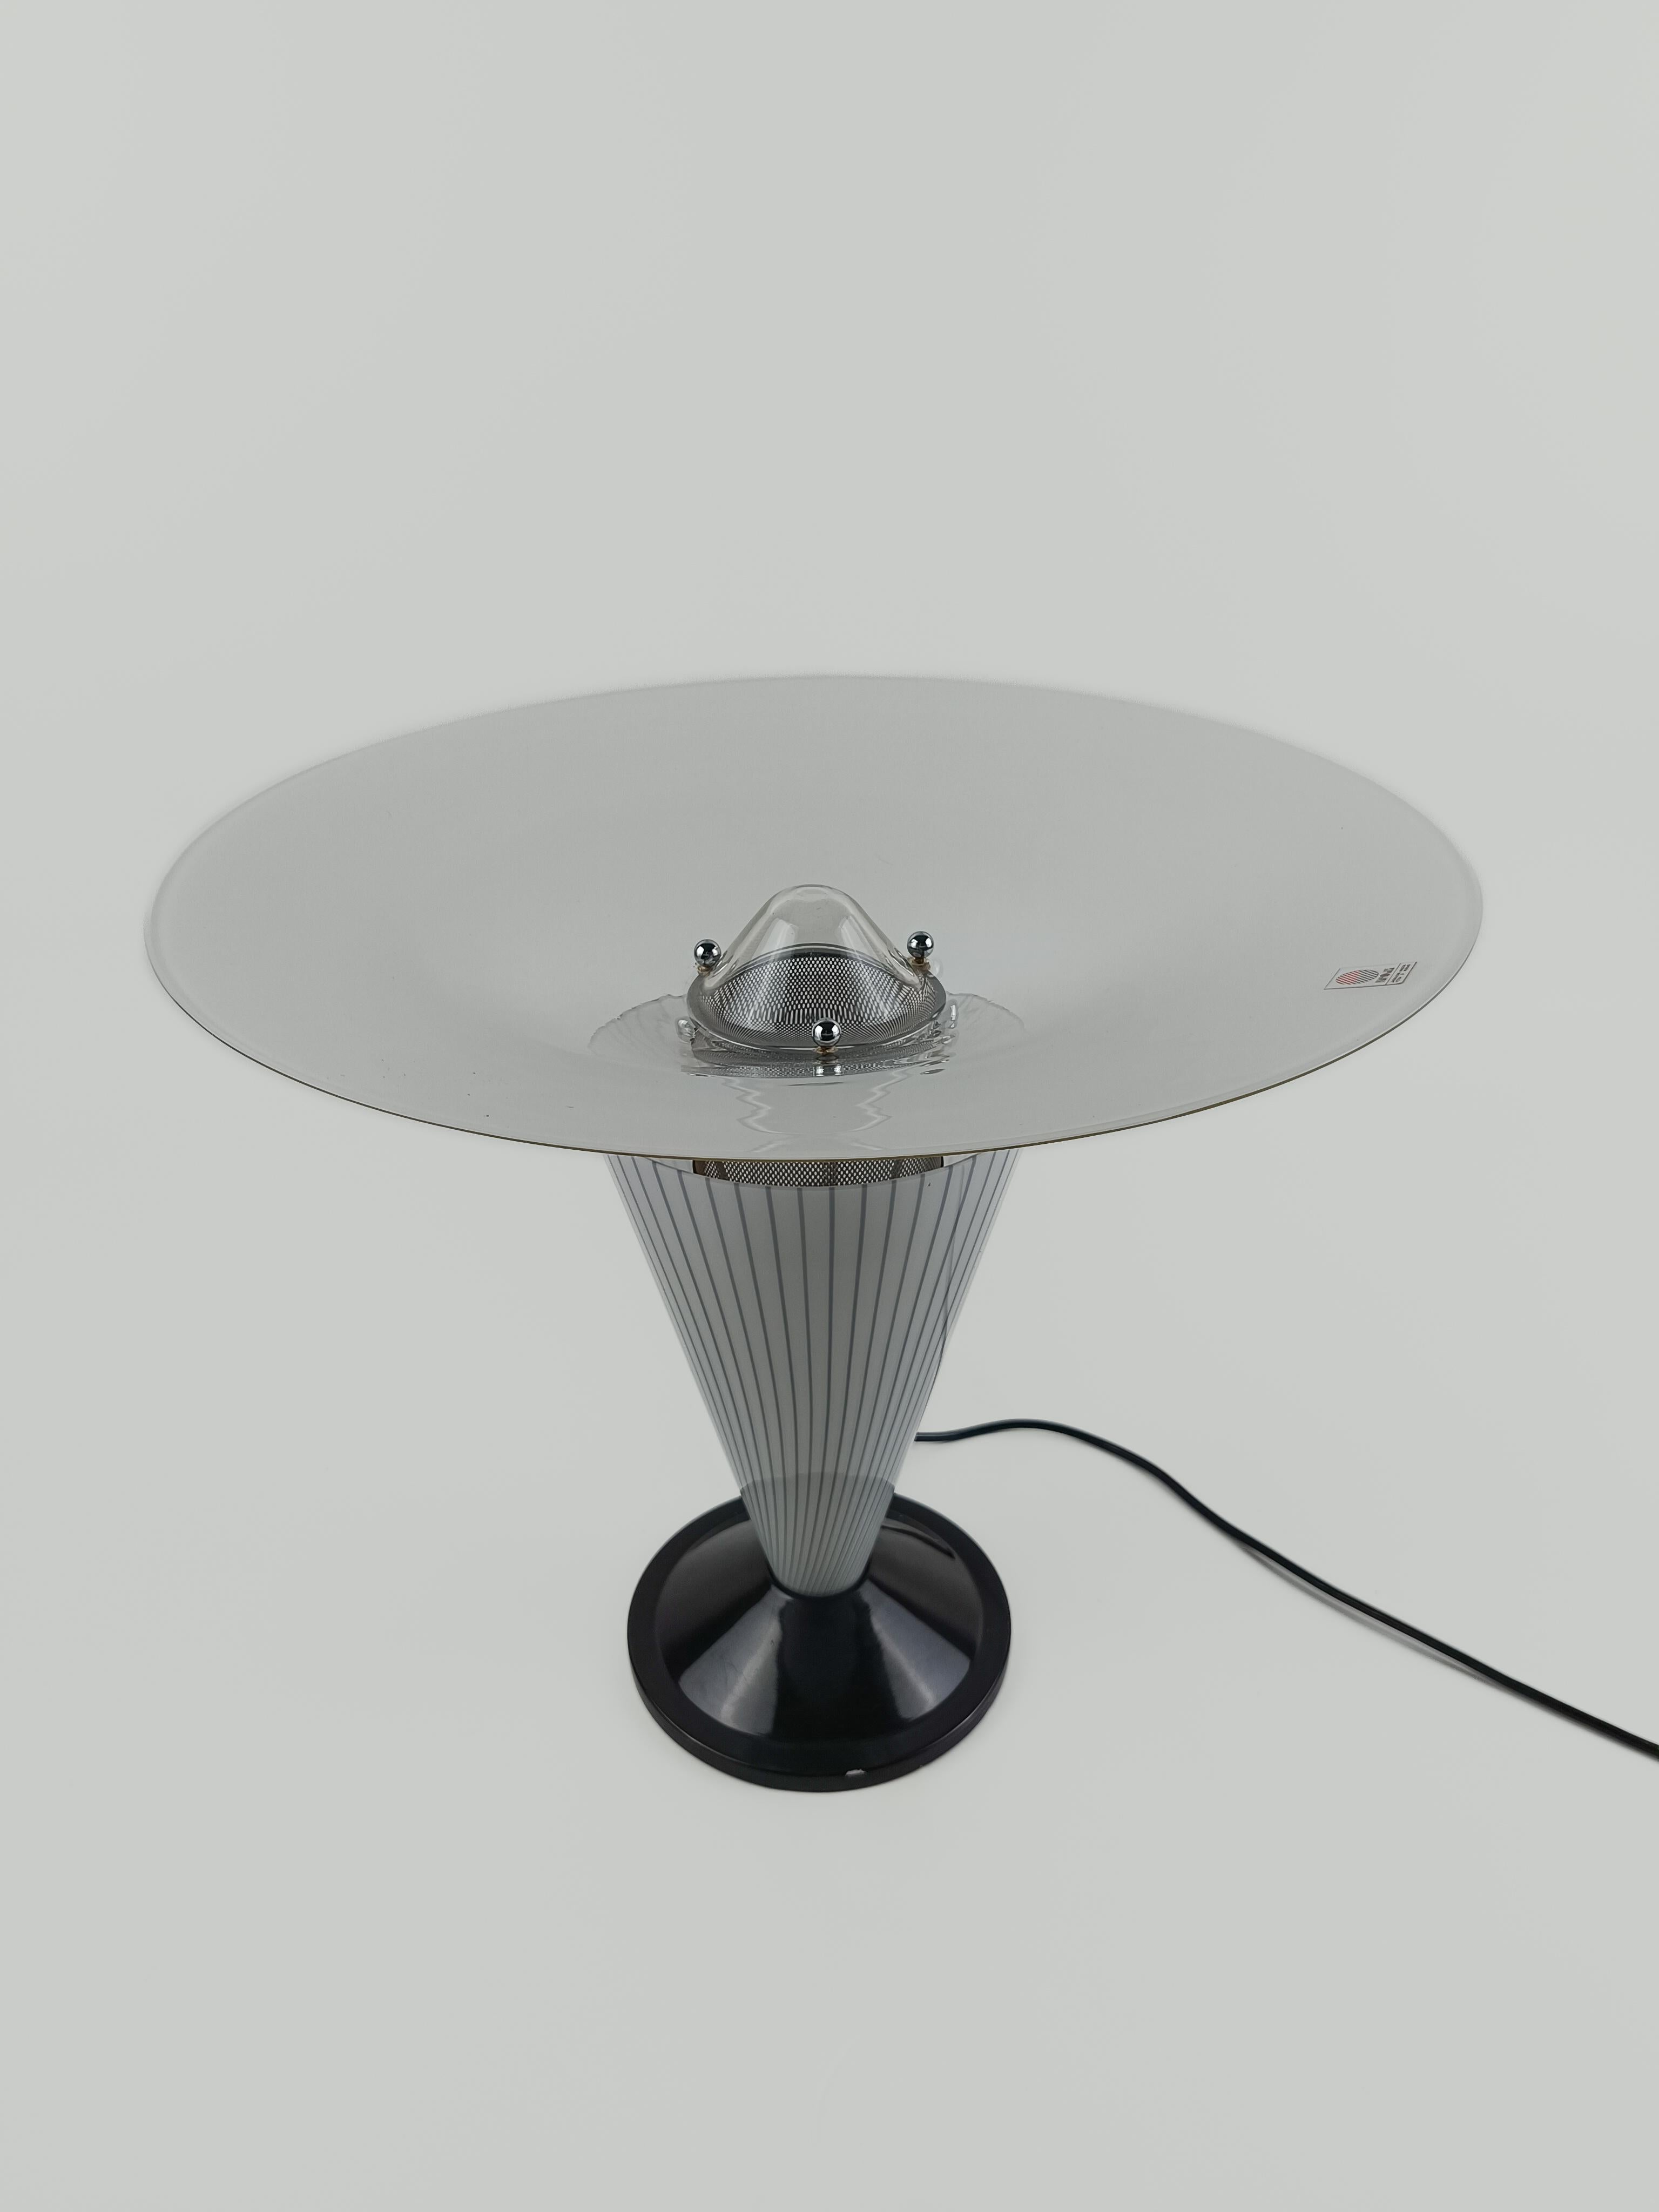 Post-Modern Italian Post Modern Table Lamp made in Murano Glass in the style of Umberto Riva For Sale